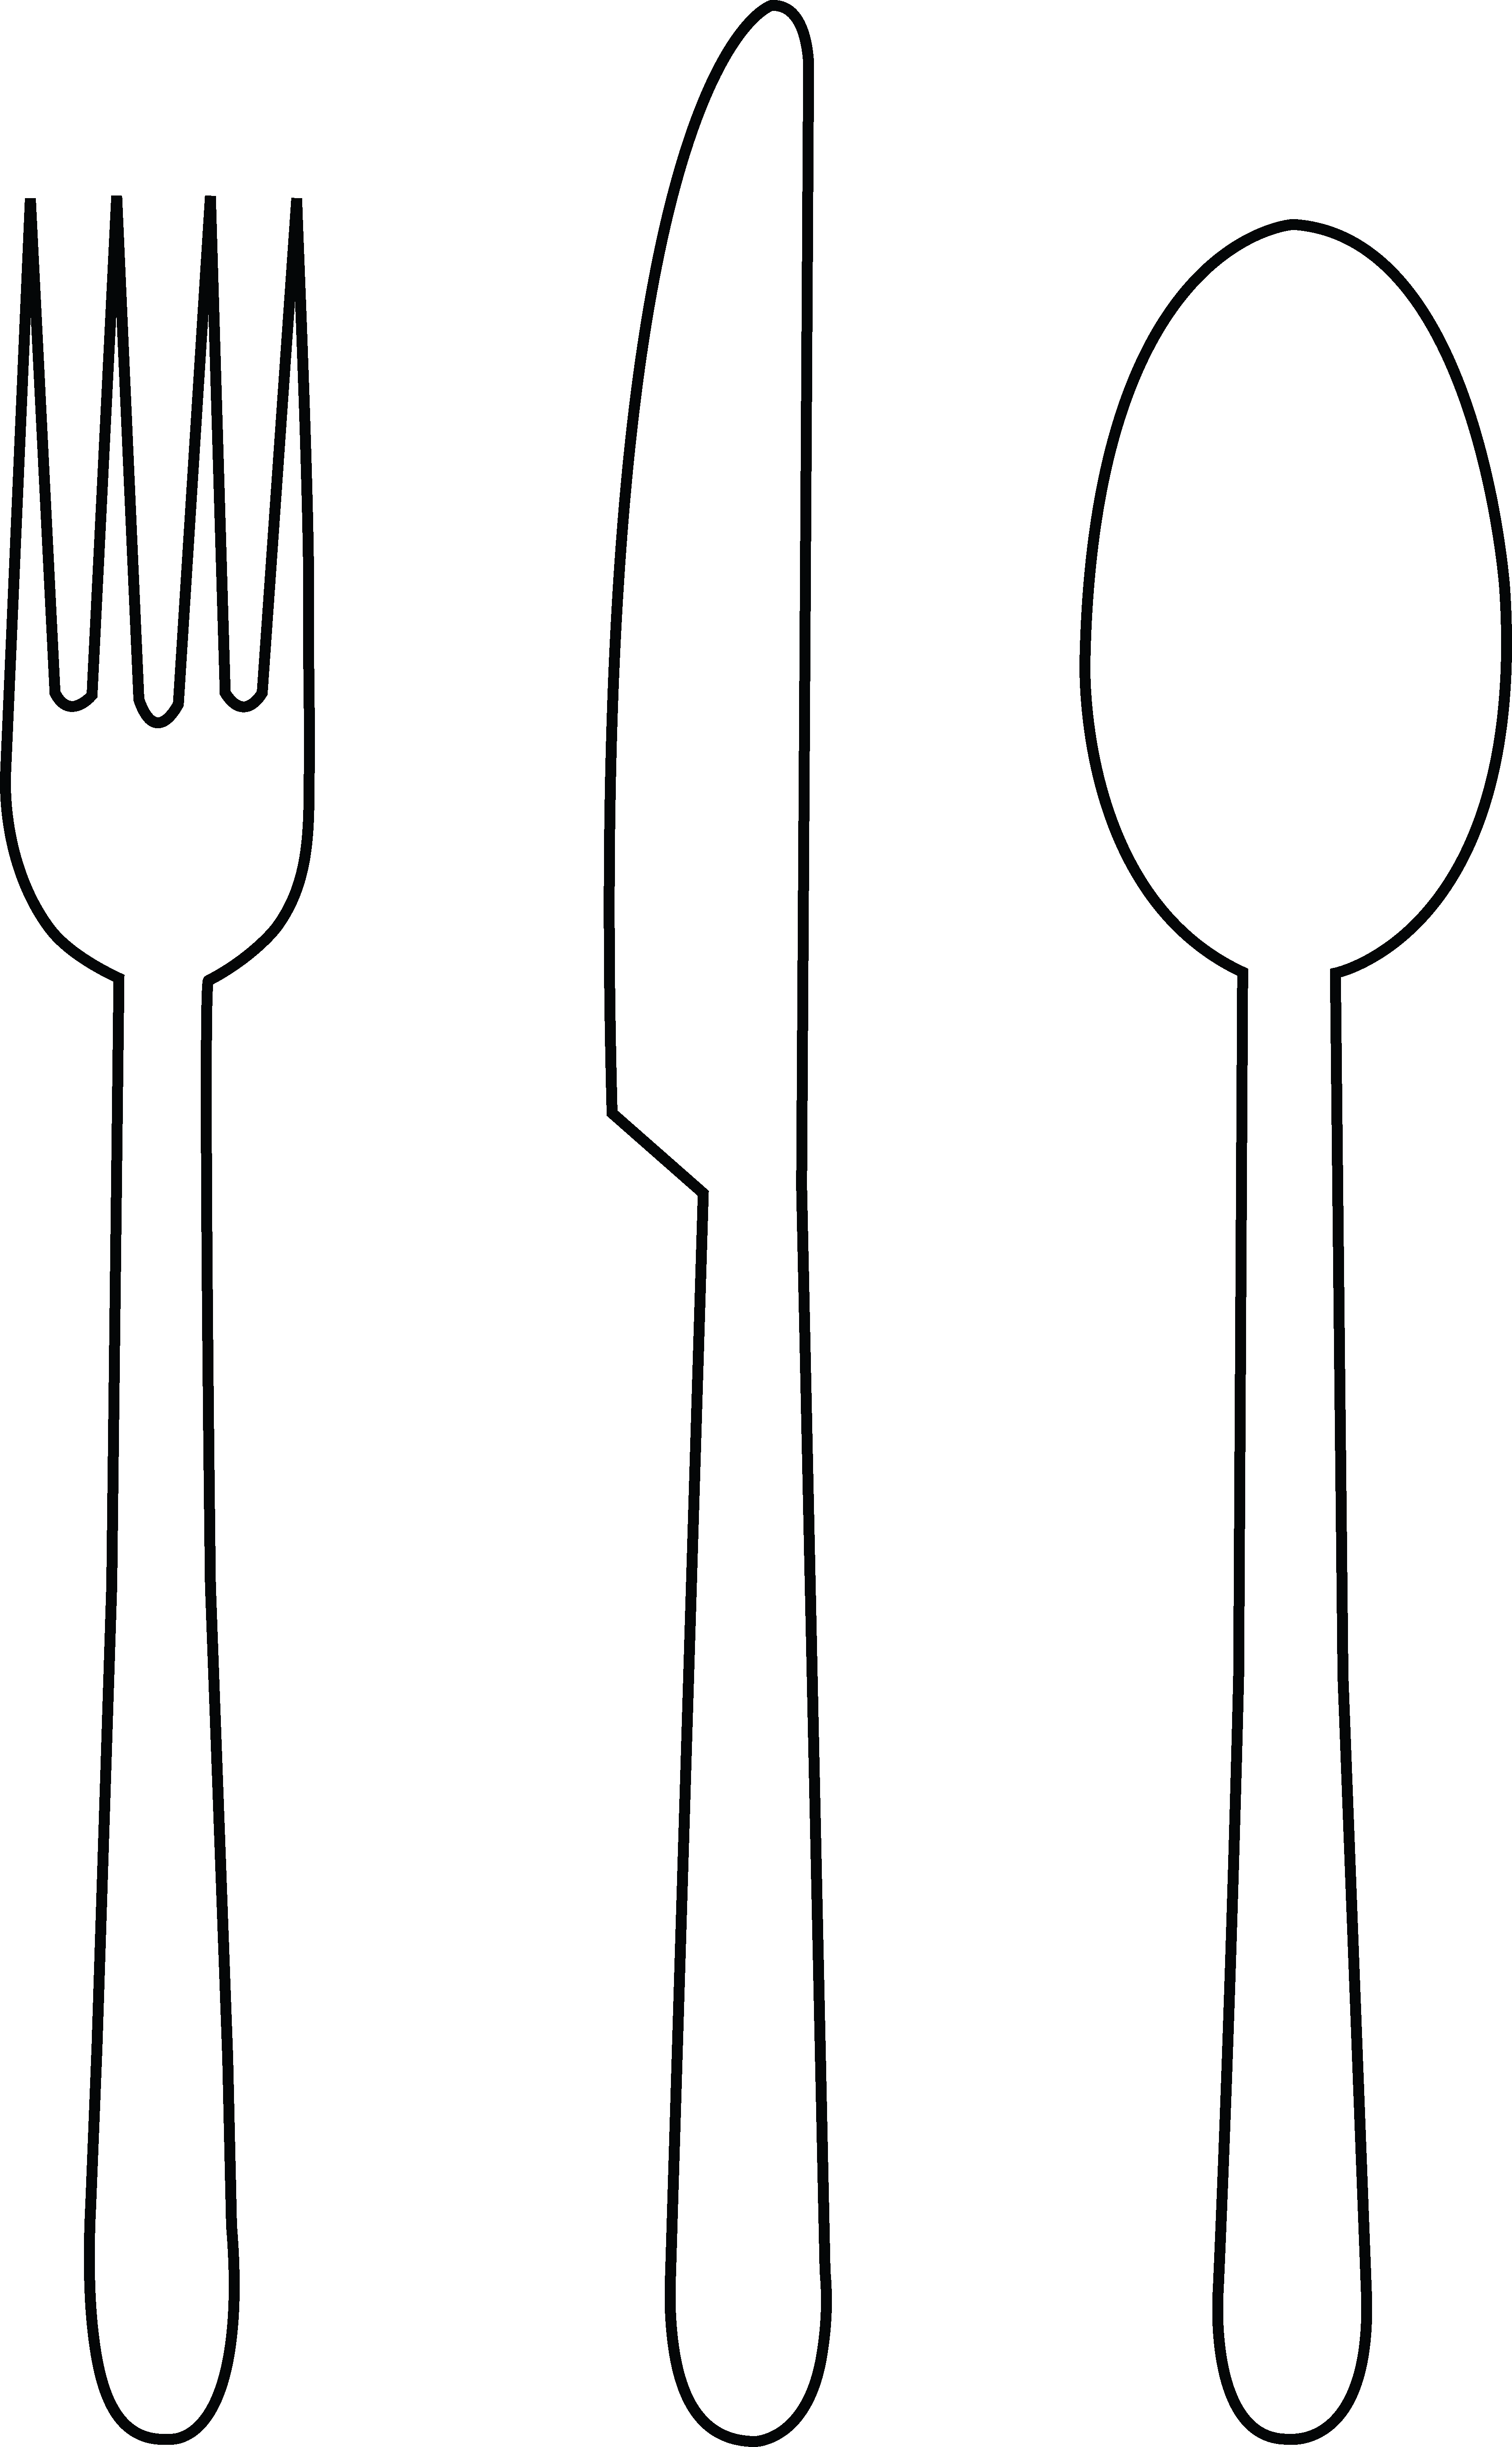 fork clipart colouring pages id 73987 : Uncategorized - yoand.